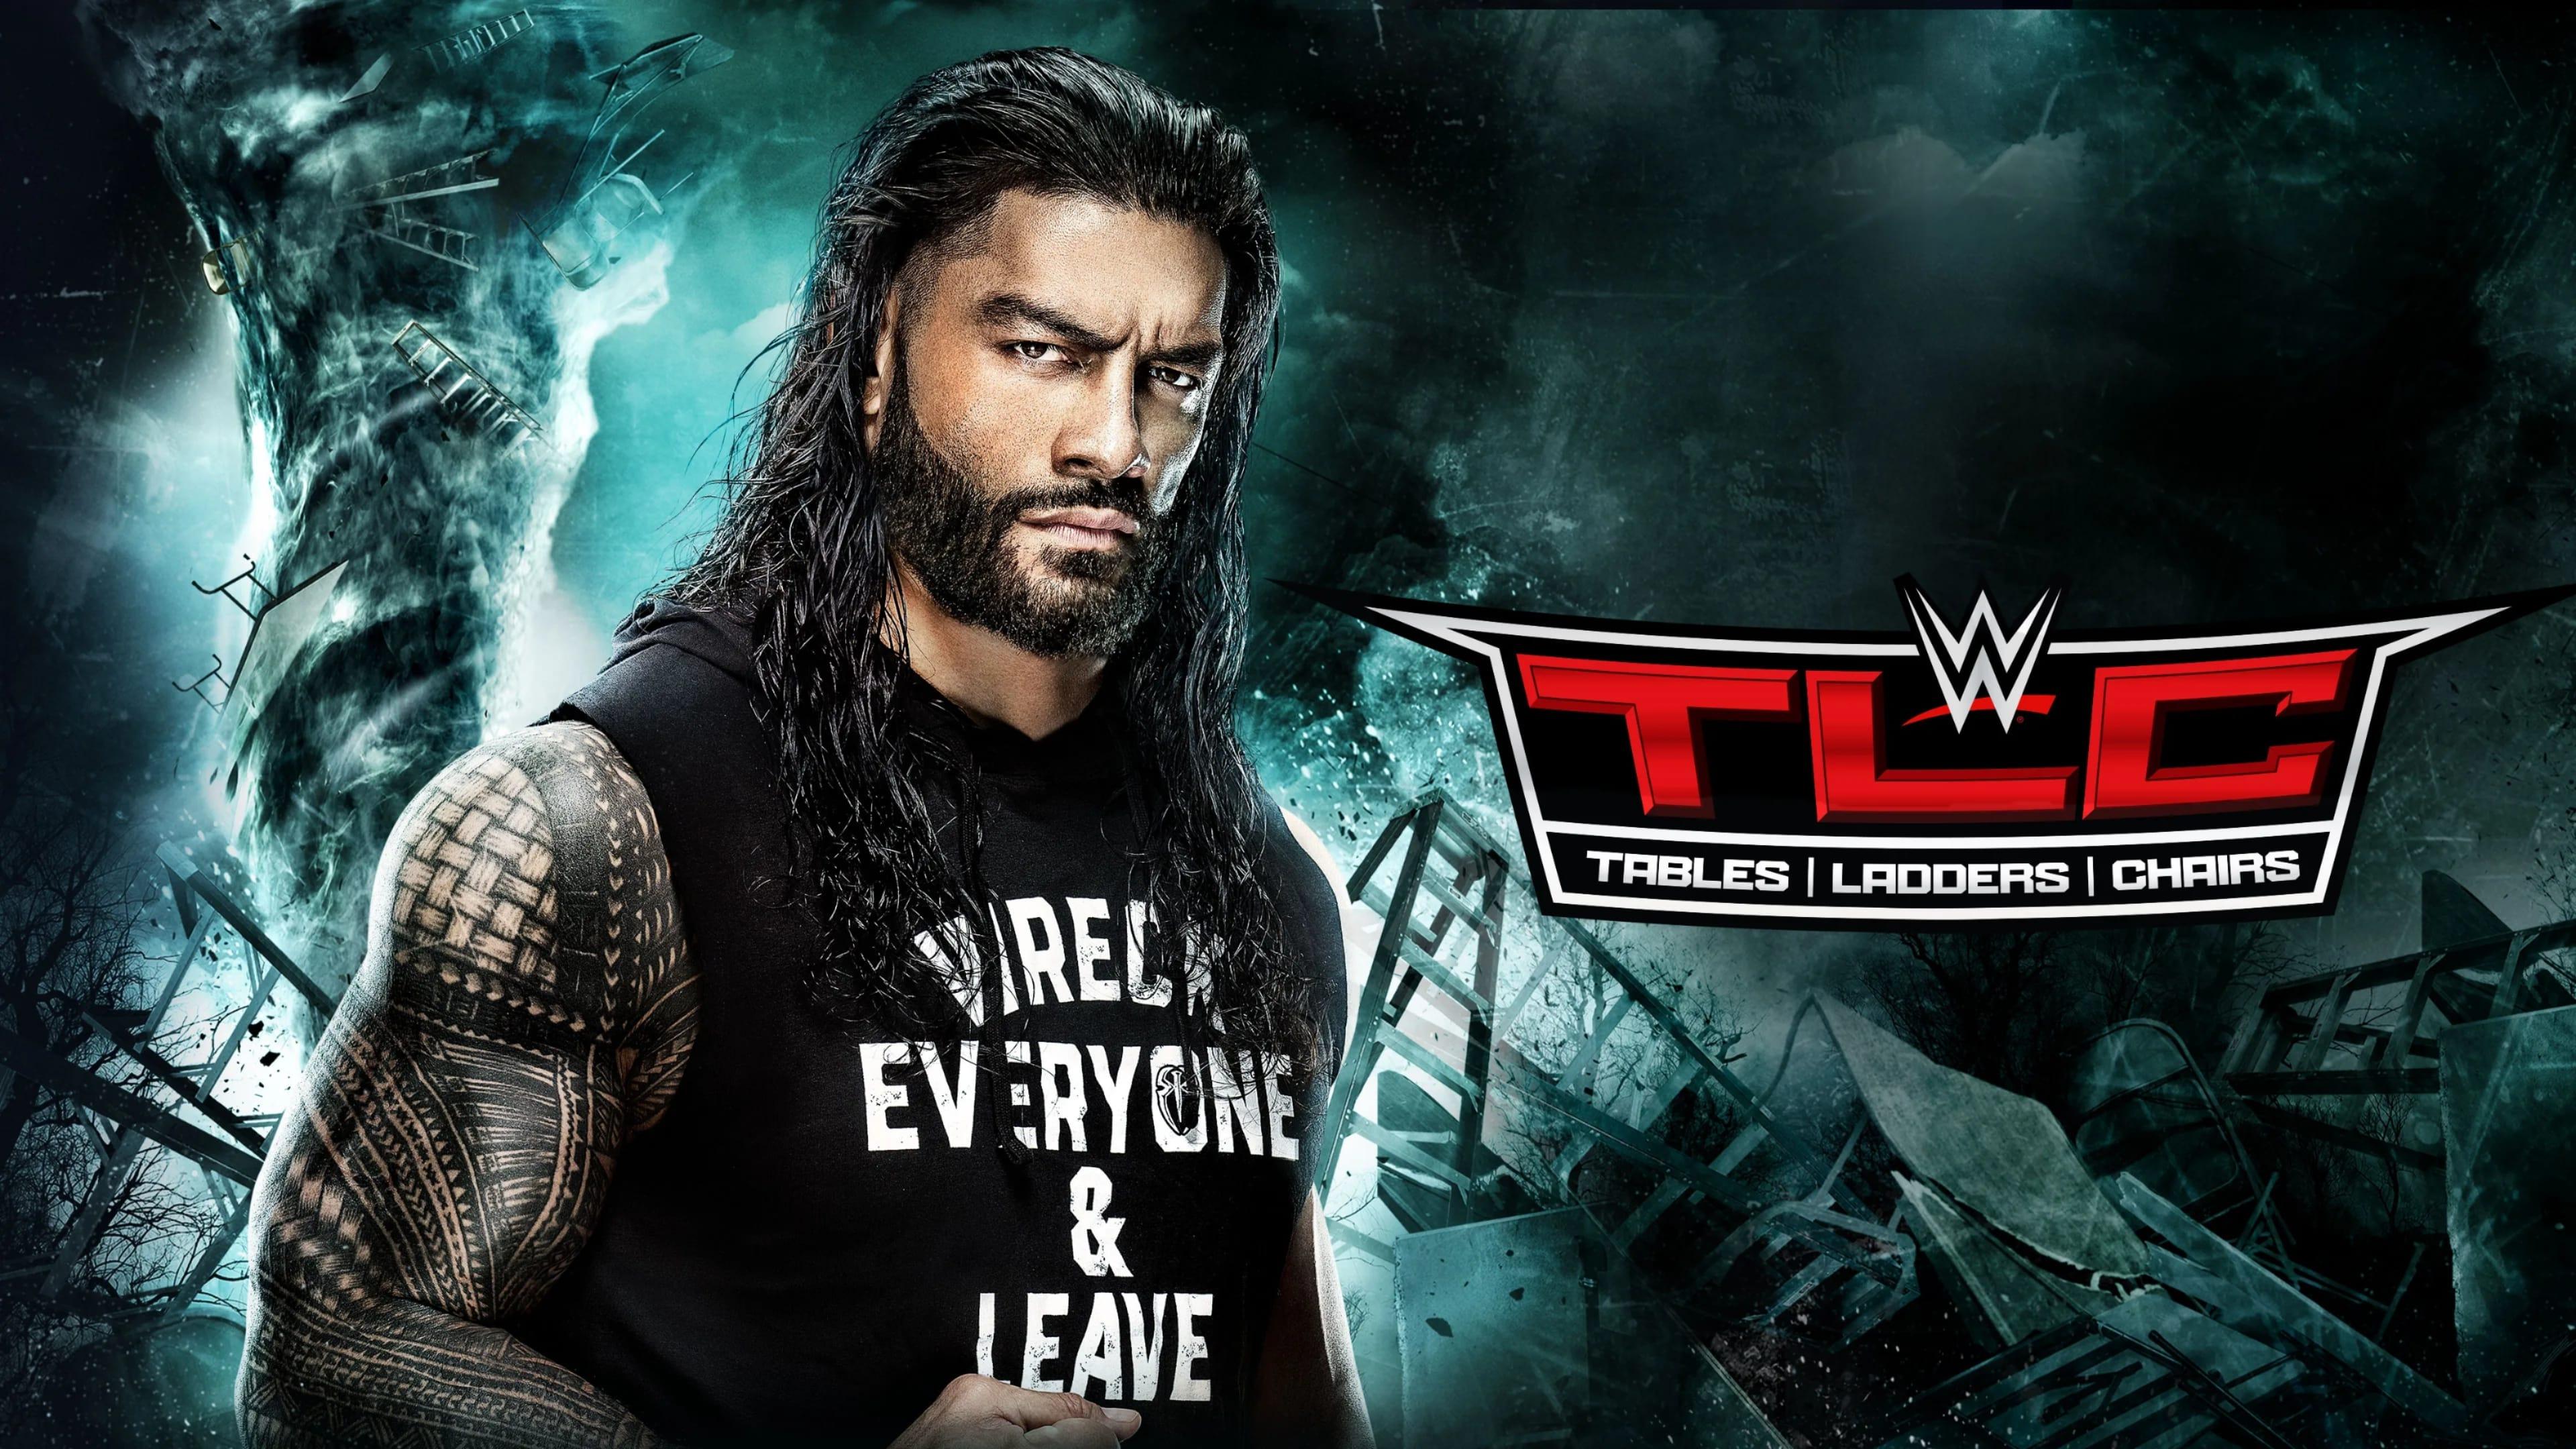 WWE TLC: Tables, Ladders & Chairs 2020 backdrop